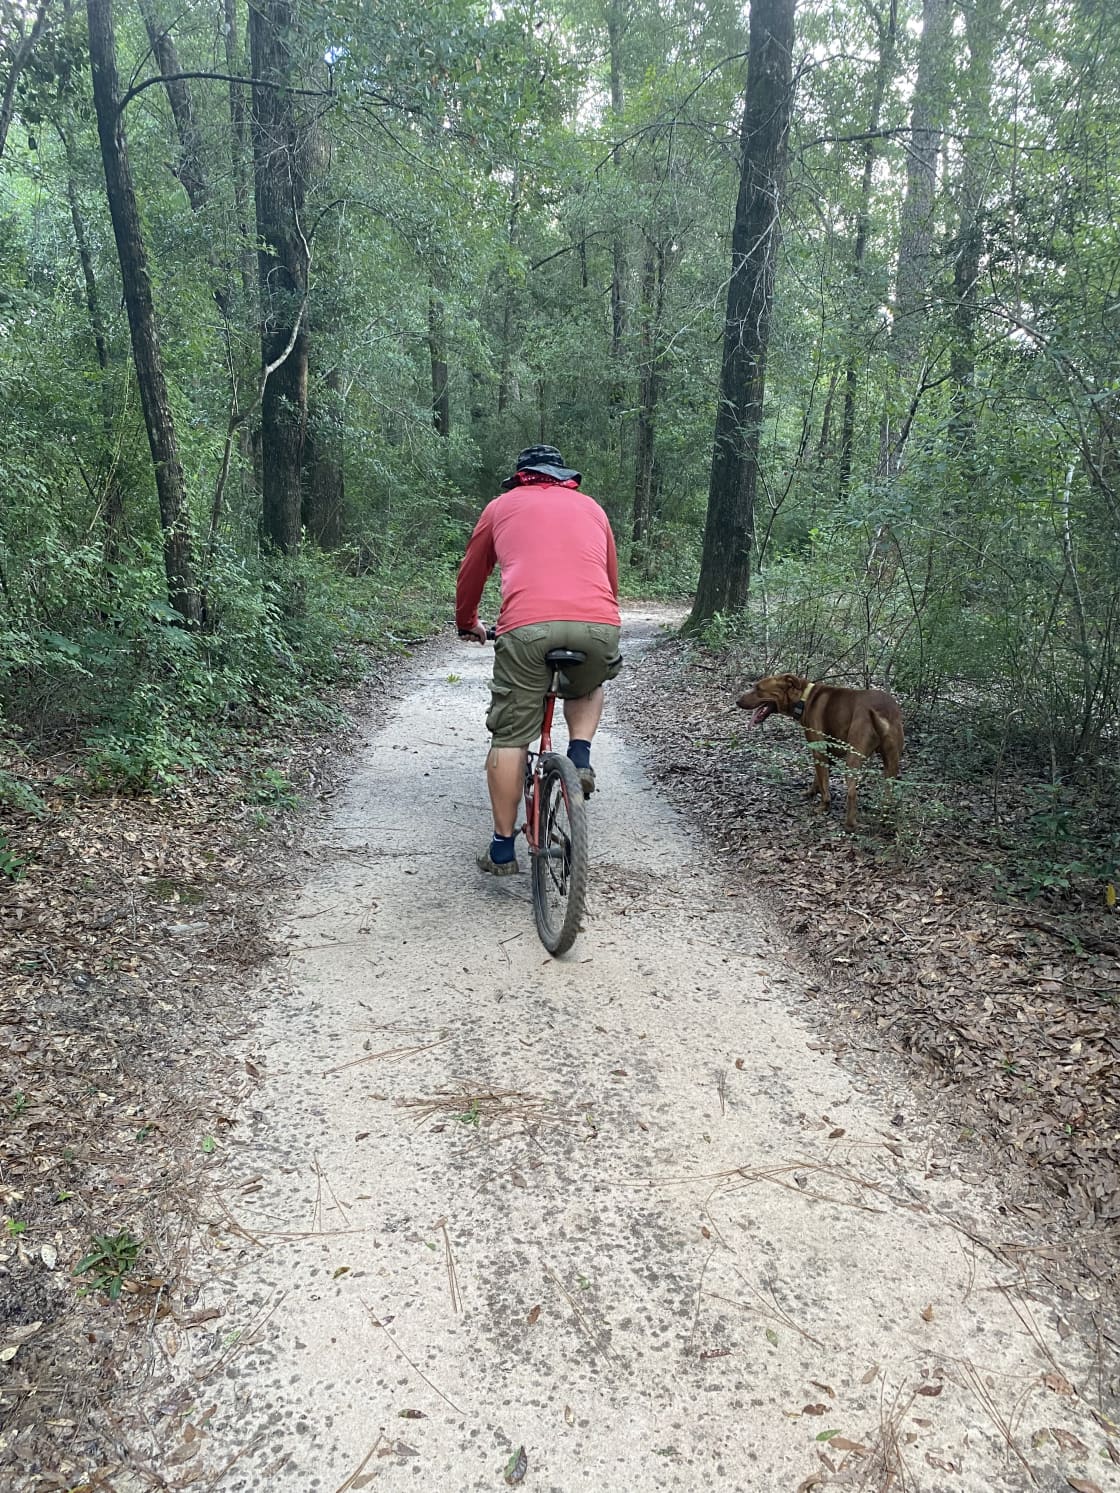 Trails are good for biking too!